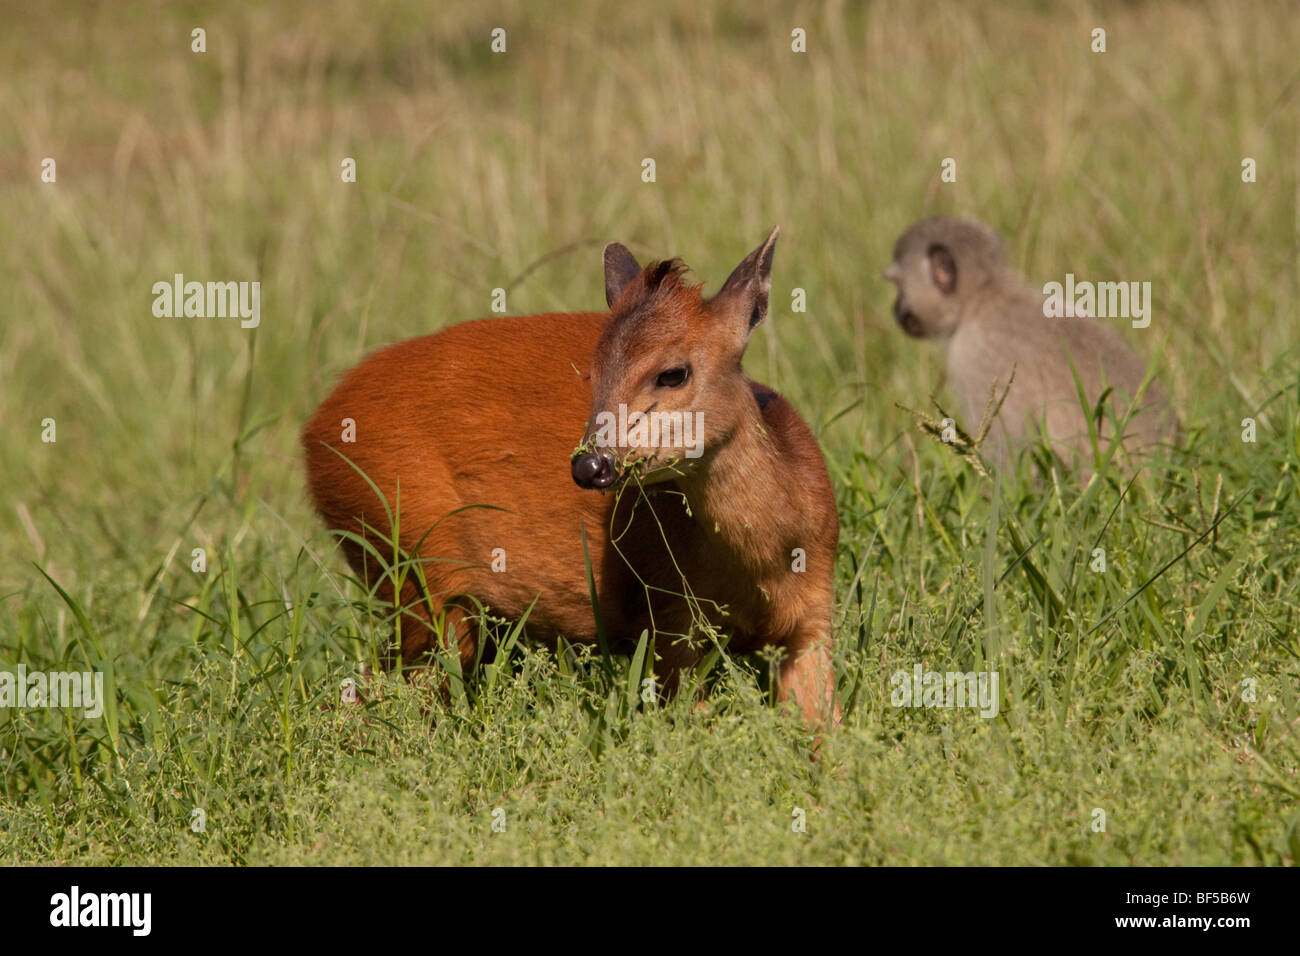 Red Forest Duiker (Cephalophus Natalensis) with a Vervet Monkey (Chlorocebus Pygerythrus). Stock Photo